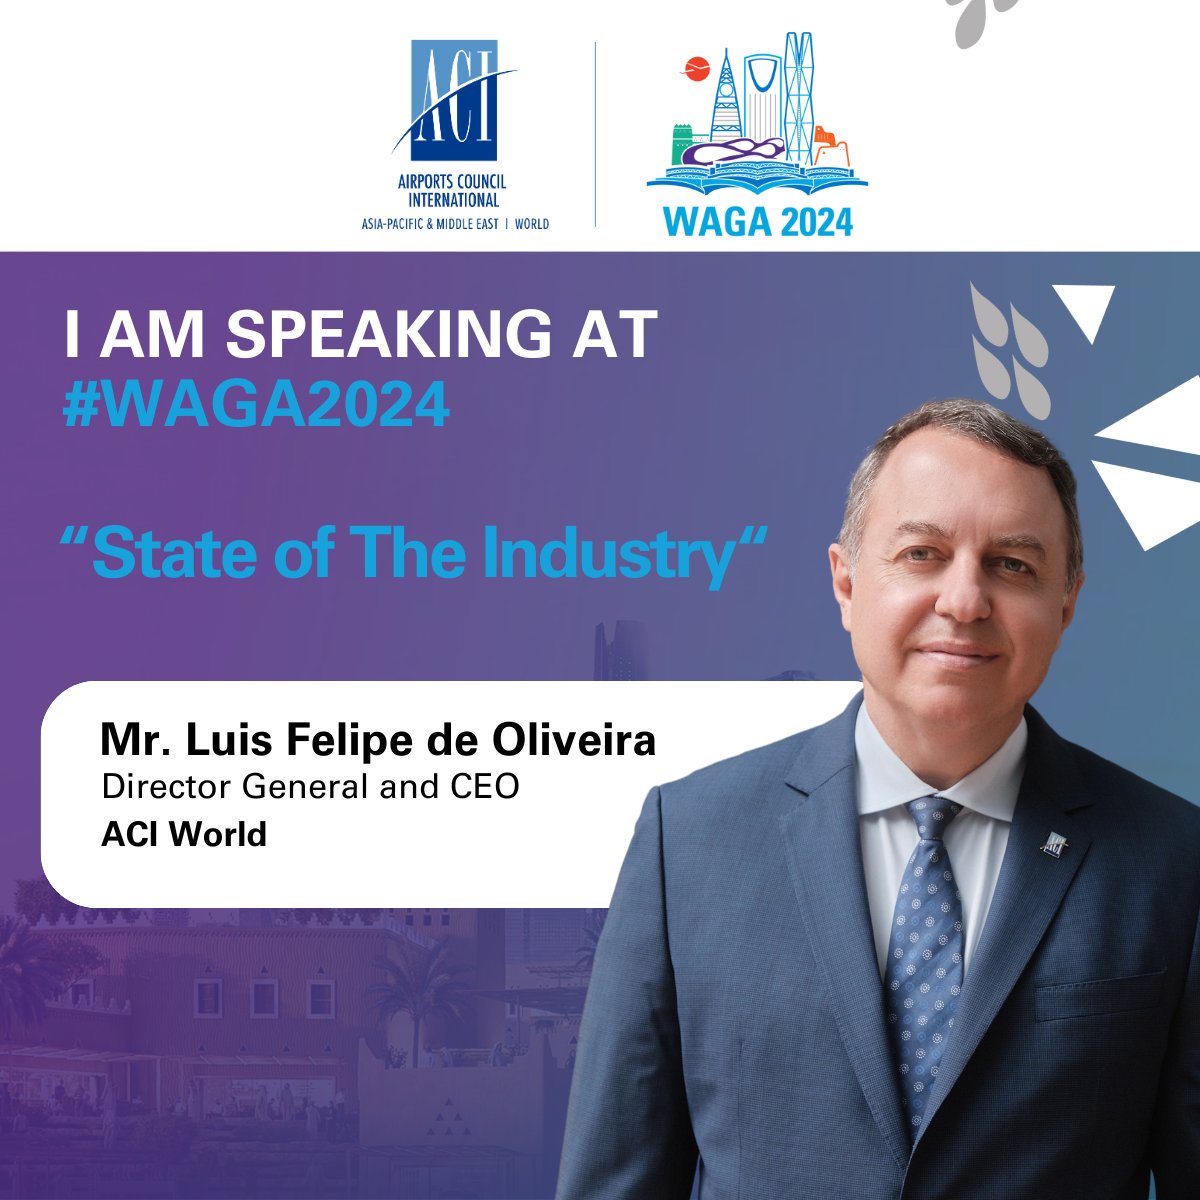 AD | #WAGA2024: Gain the latest insights from DG & CEO @lf_oliveira1 State of the Industry address at @ACIAPACMID /@ACIWorld Annual General Assembly, Conference, and Exhibition. Register: obi41.nl/ycx2p9uk 📅May 21-23 🕌 Host: @riyadhairports